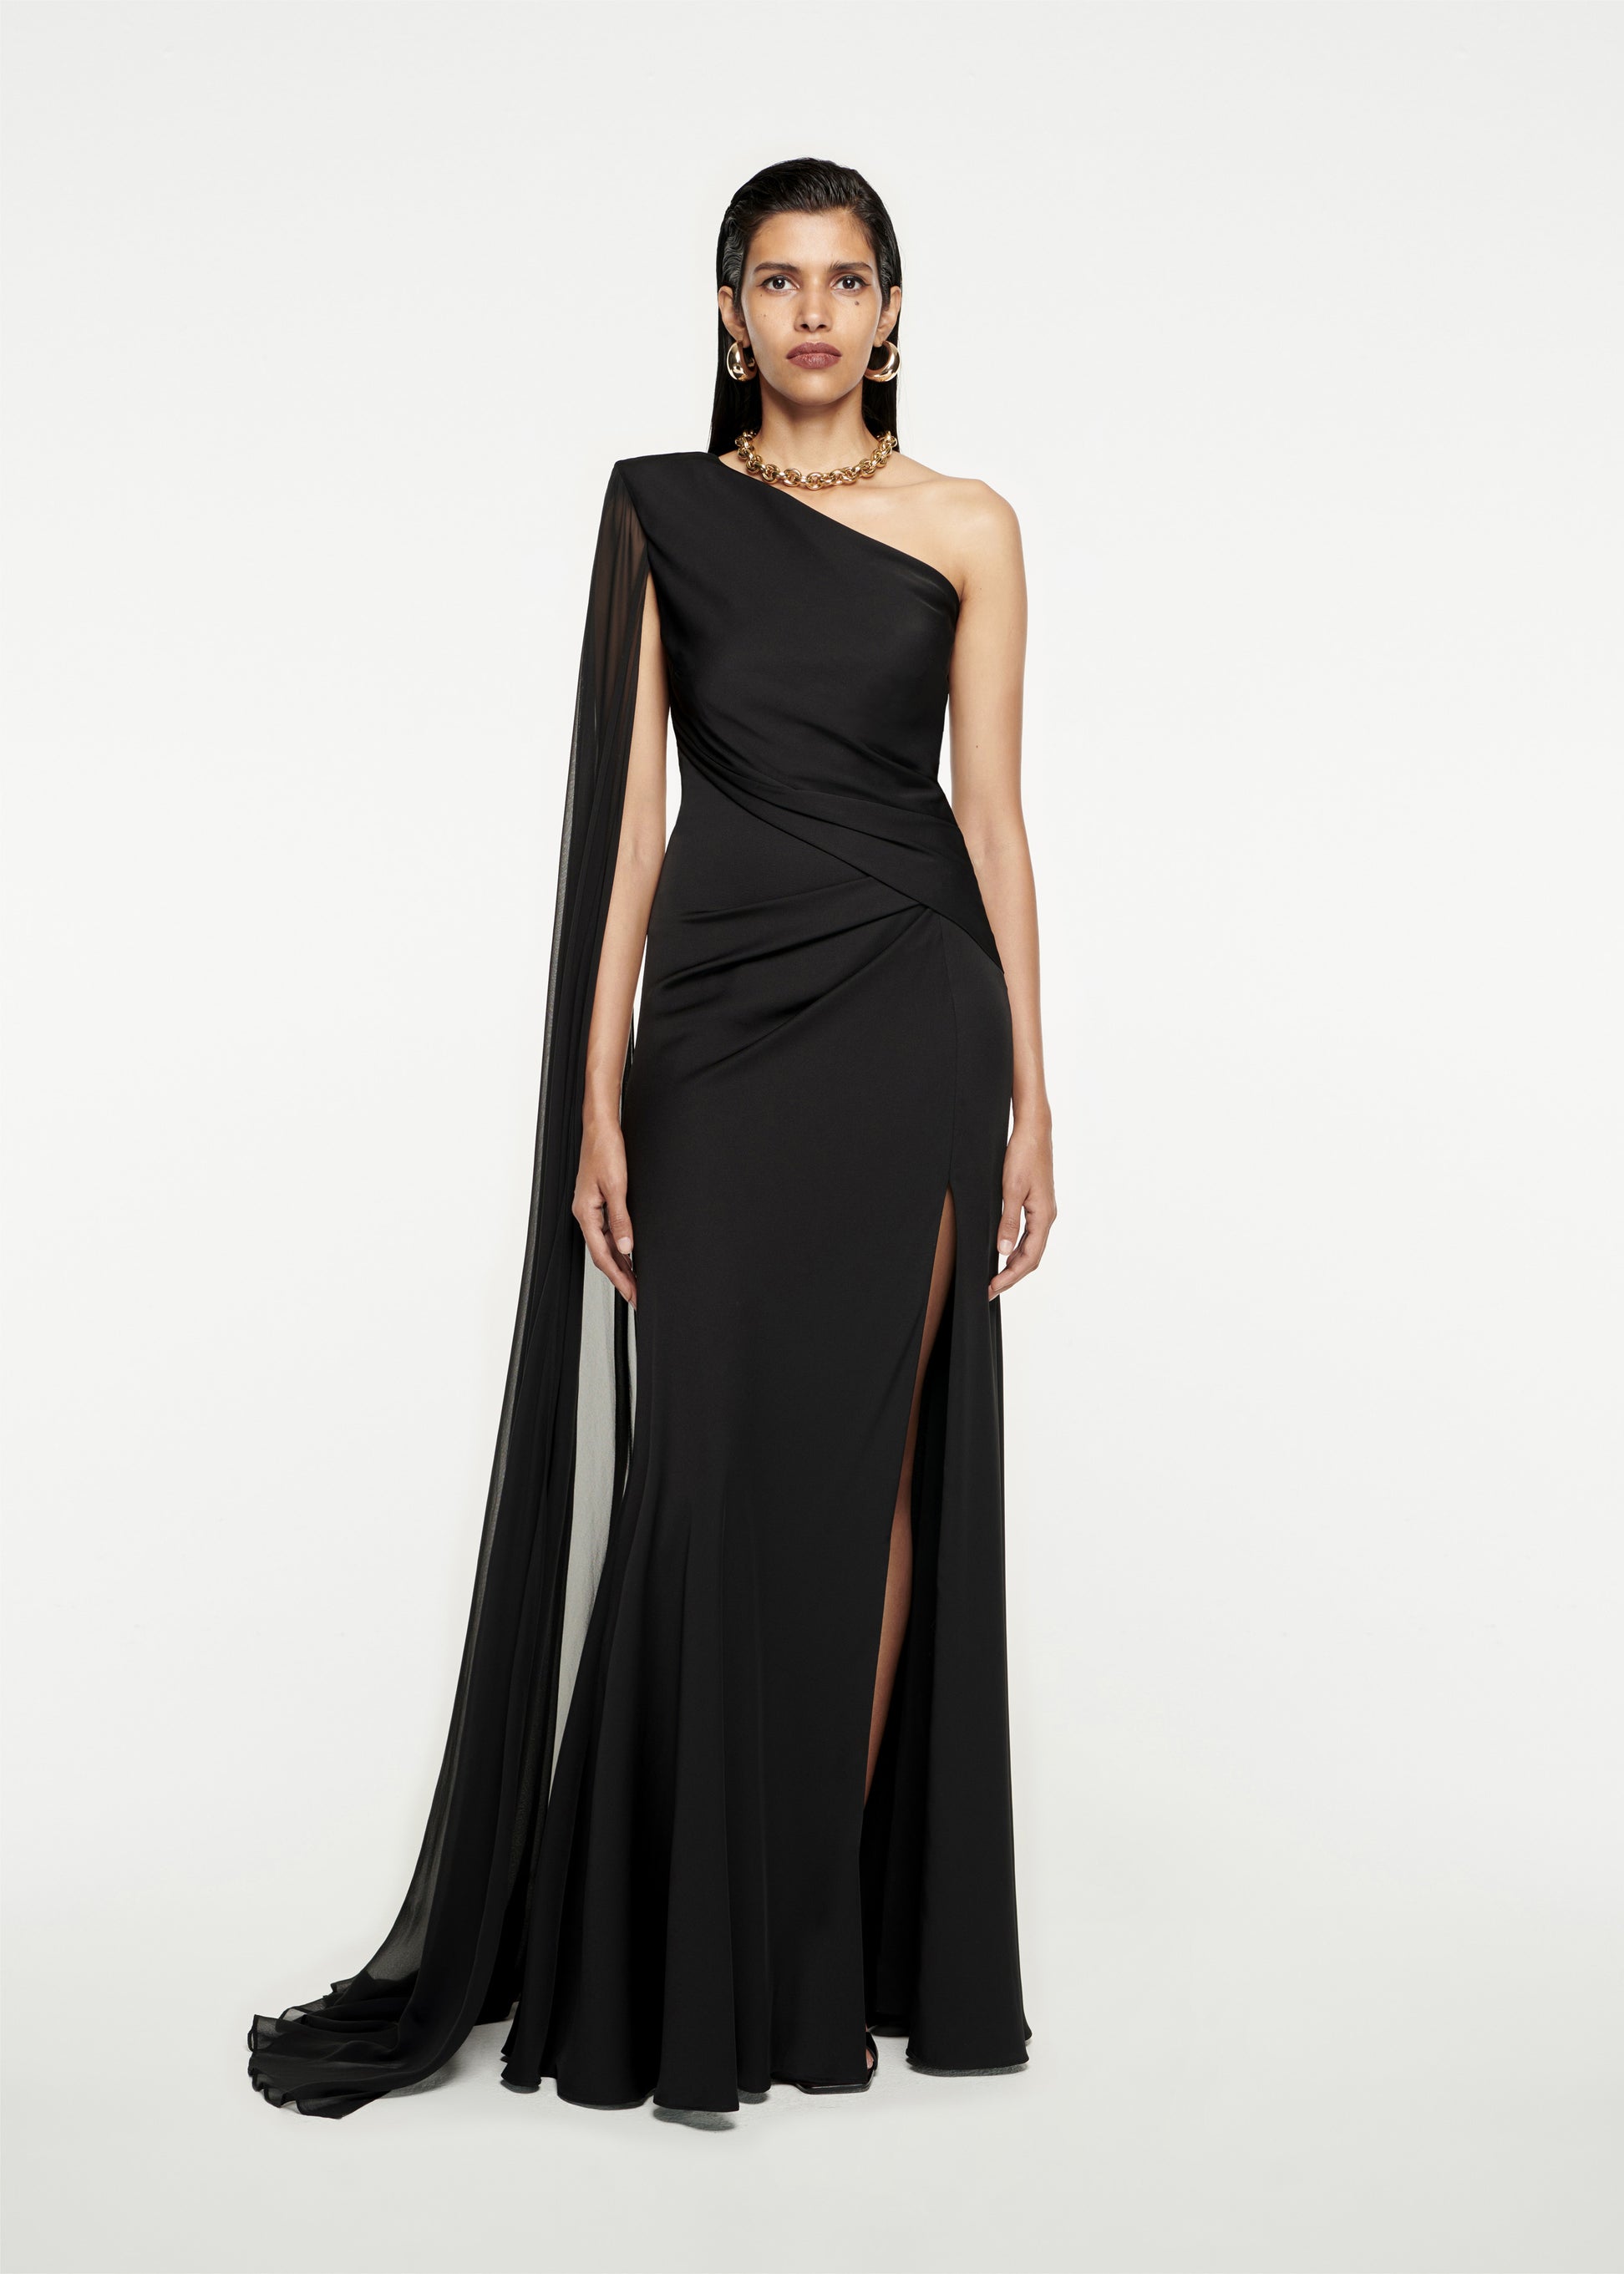 Woman wearing the Asymmetric Stretch Silk Crepe Gown in Black